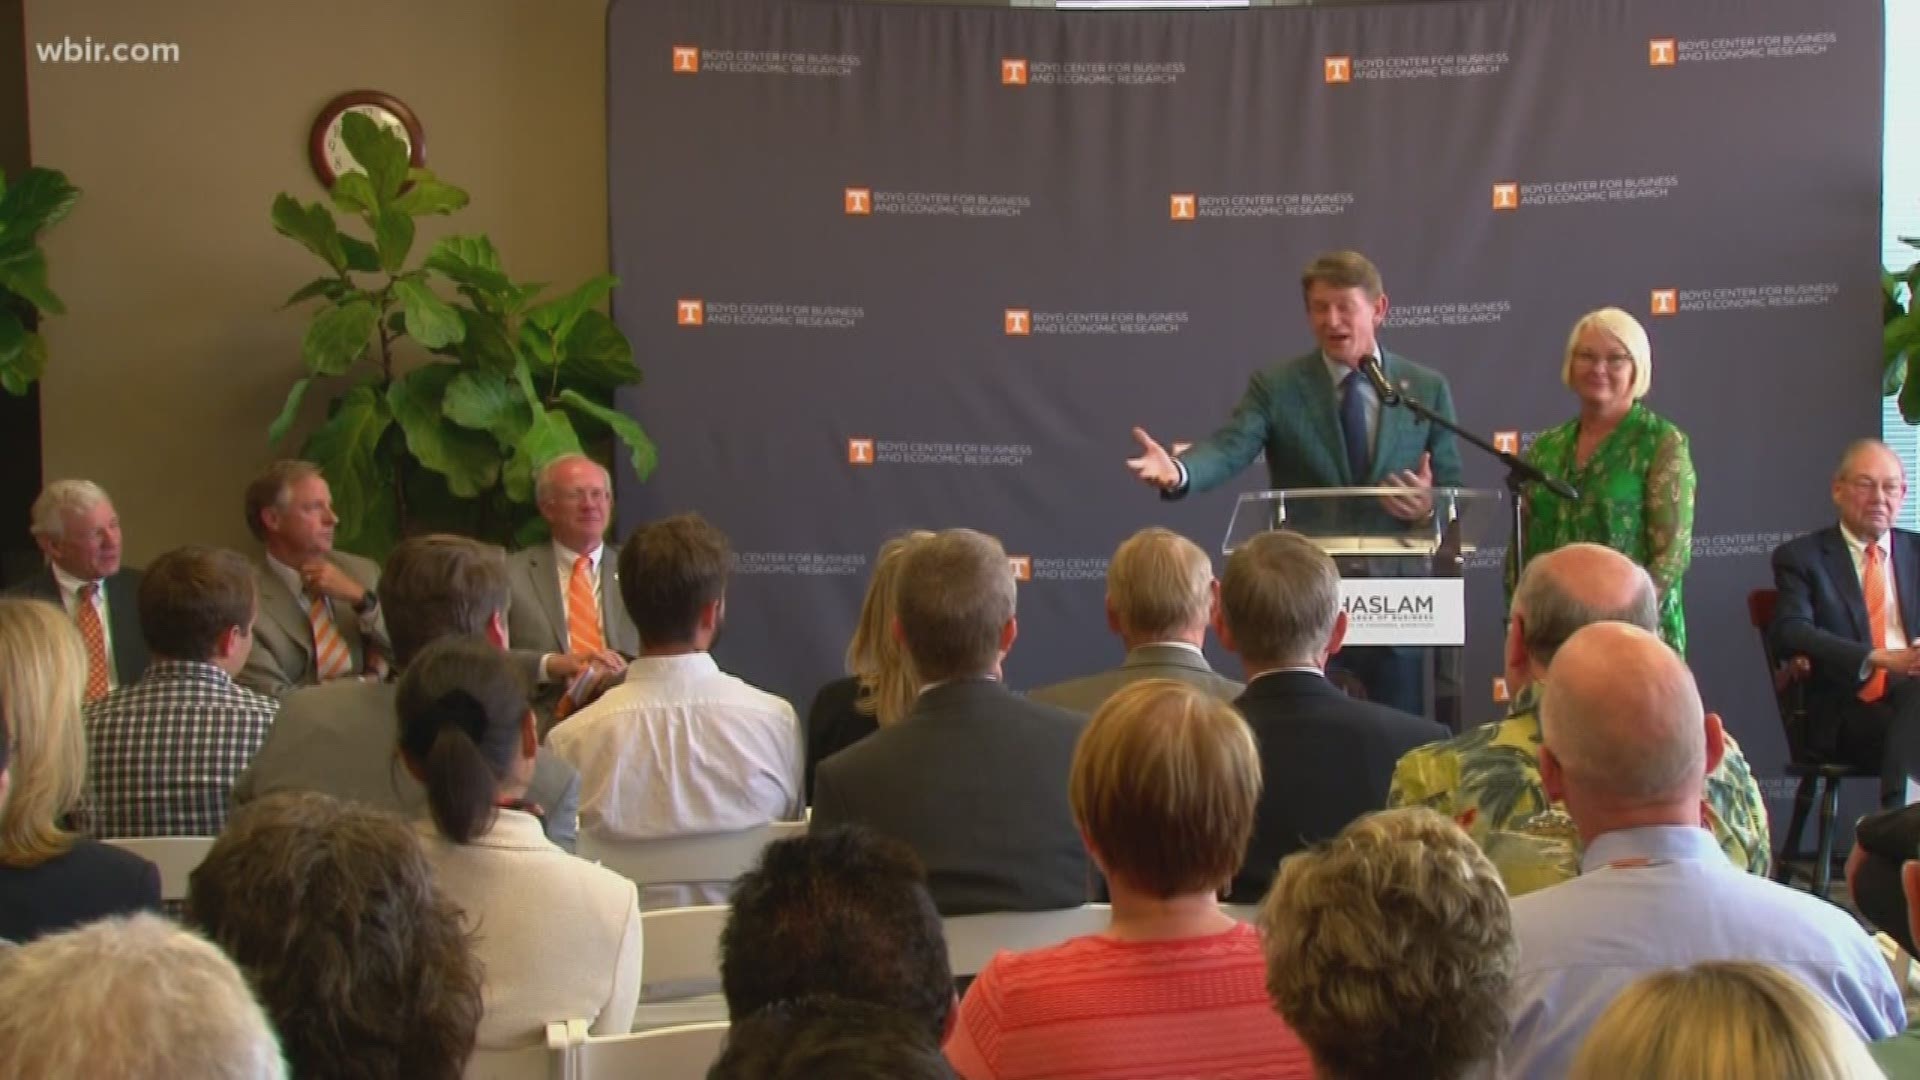 ---The University of Tennessee Board of Trustees will consider appointing former Republican gubernatorial candidate Randy Boyd as interim president of the school system.